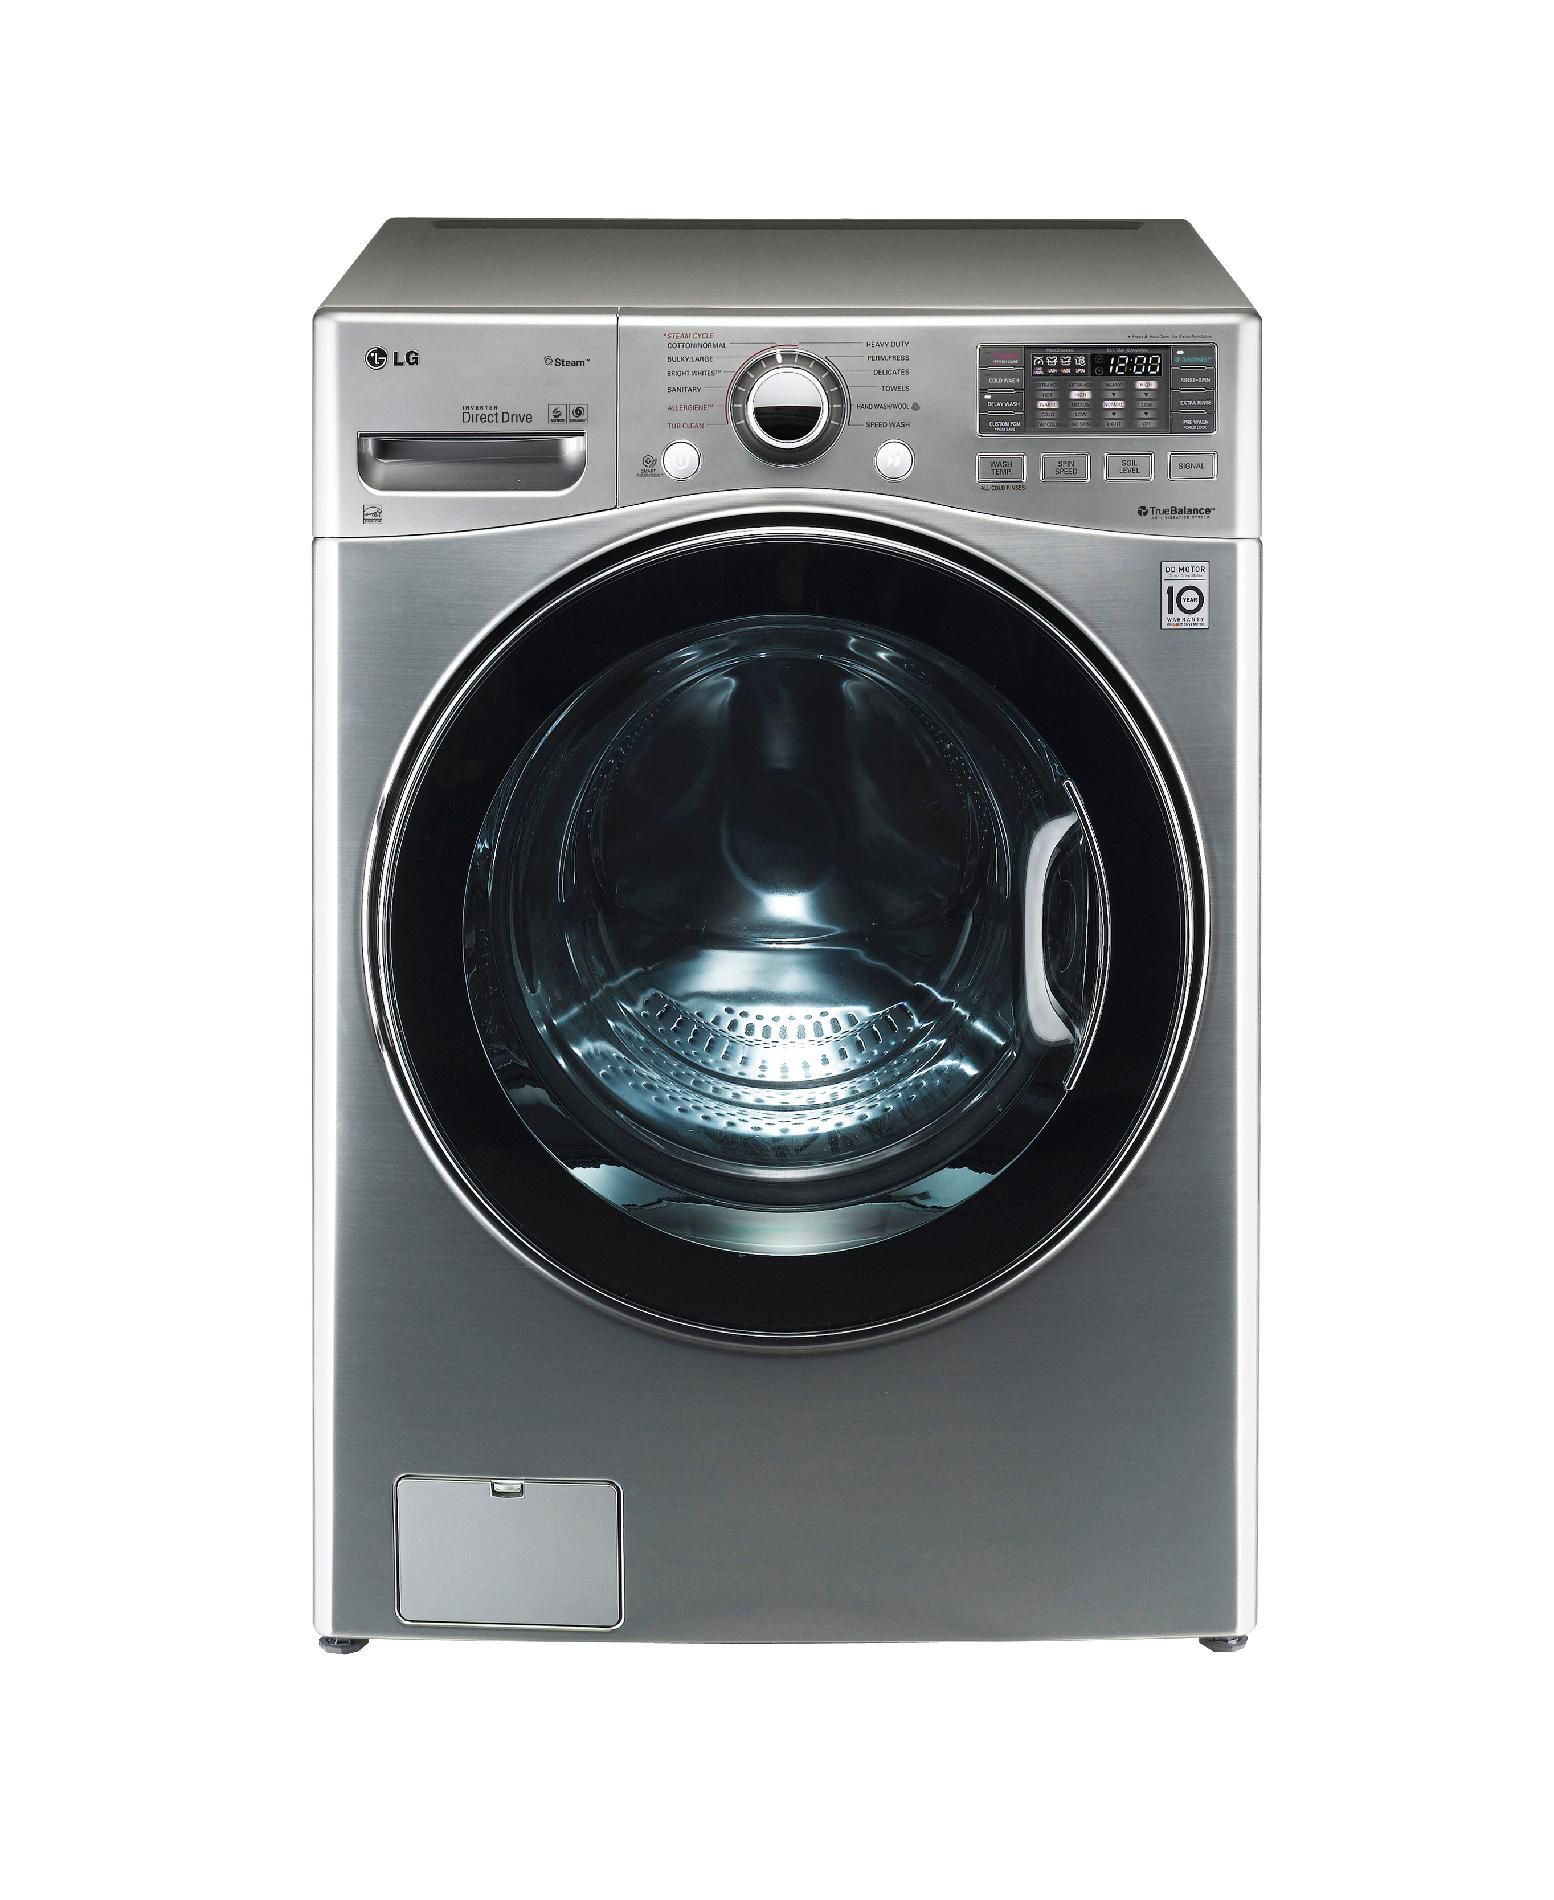 LG 4.0 cu. ft. Ultra-Large-Capacity Steam Front-Load Washer - Graphite Steel